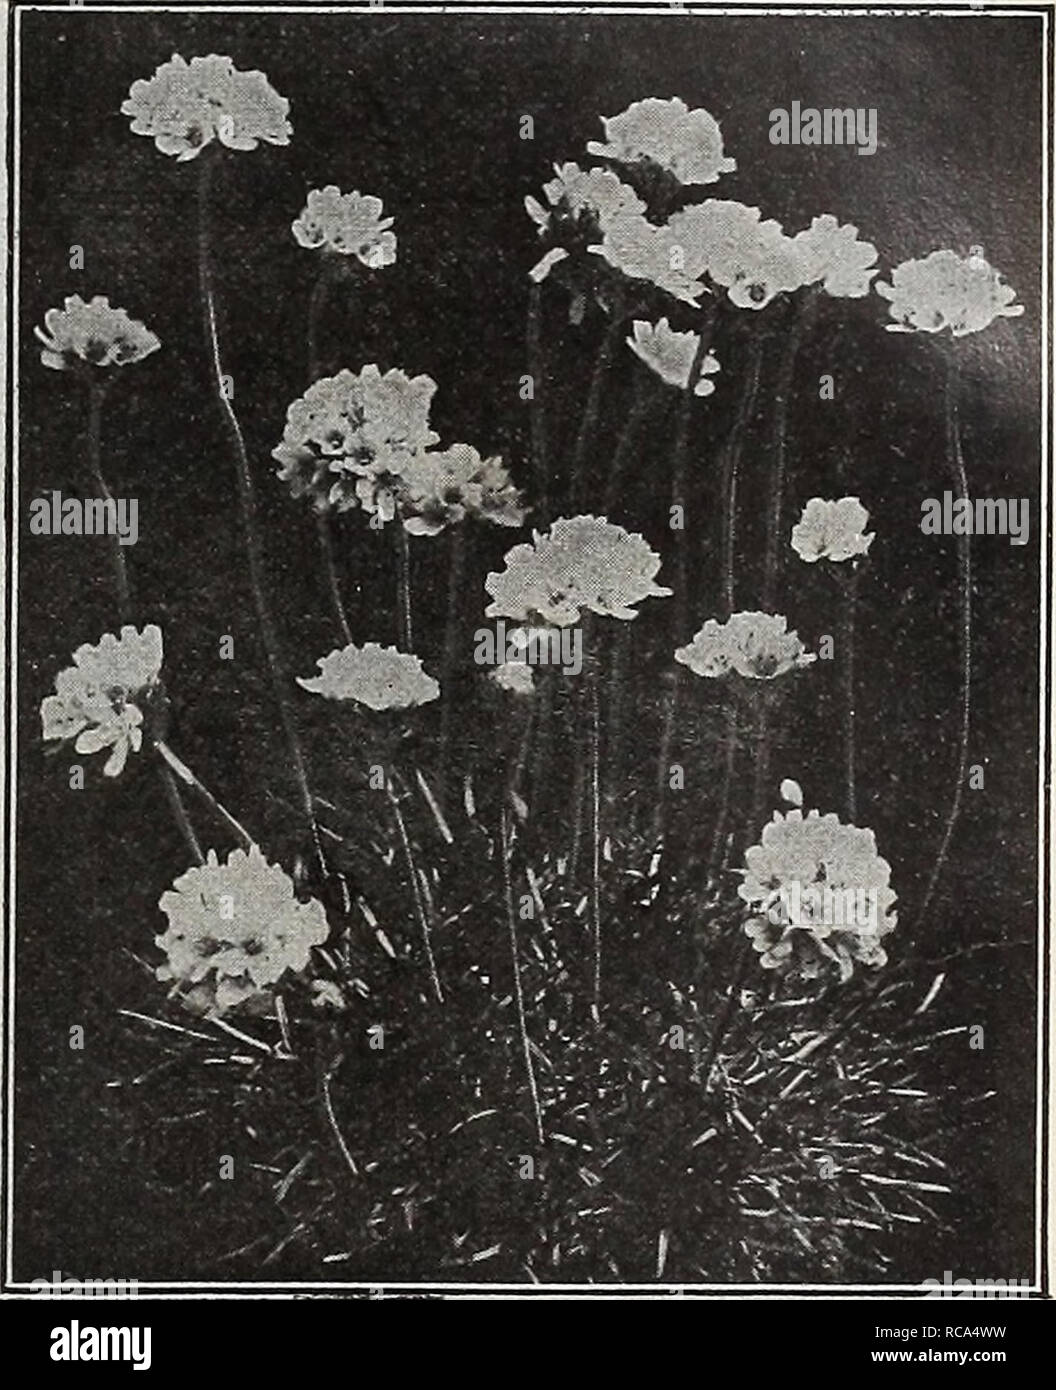 . Dreer's garden book 1918. Seeds Catalogs; Nursery stock Catalogs; Gardening Equipment and supplies Catalogs; Flowers Seeds Catalogs; Vegetables Seeds Catalogs; Fruit Seeds Catalogs. Dwakf Alpine Aster Armbria Japanese Double White Hardy Aster This came to us unnamed from a Japanese nurseryman, and is entirely distinct from all other hardy Asters; the plants are of symmetrical habit and grow about 2 feet high and bear from July to September double white flowers not unlike the double white Feverfew. 30 cts. each; $3.00 per doz. Aster Amellus King George SUMMER-FLOWERING HARDY ASTERS The follow Stock Photo